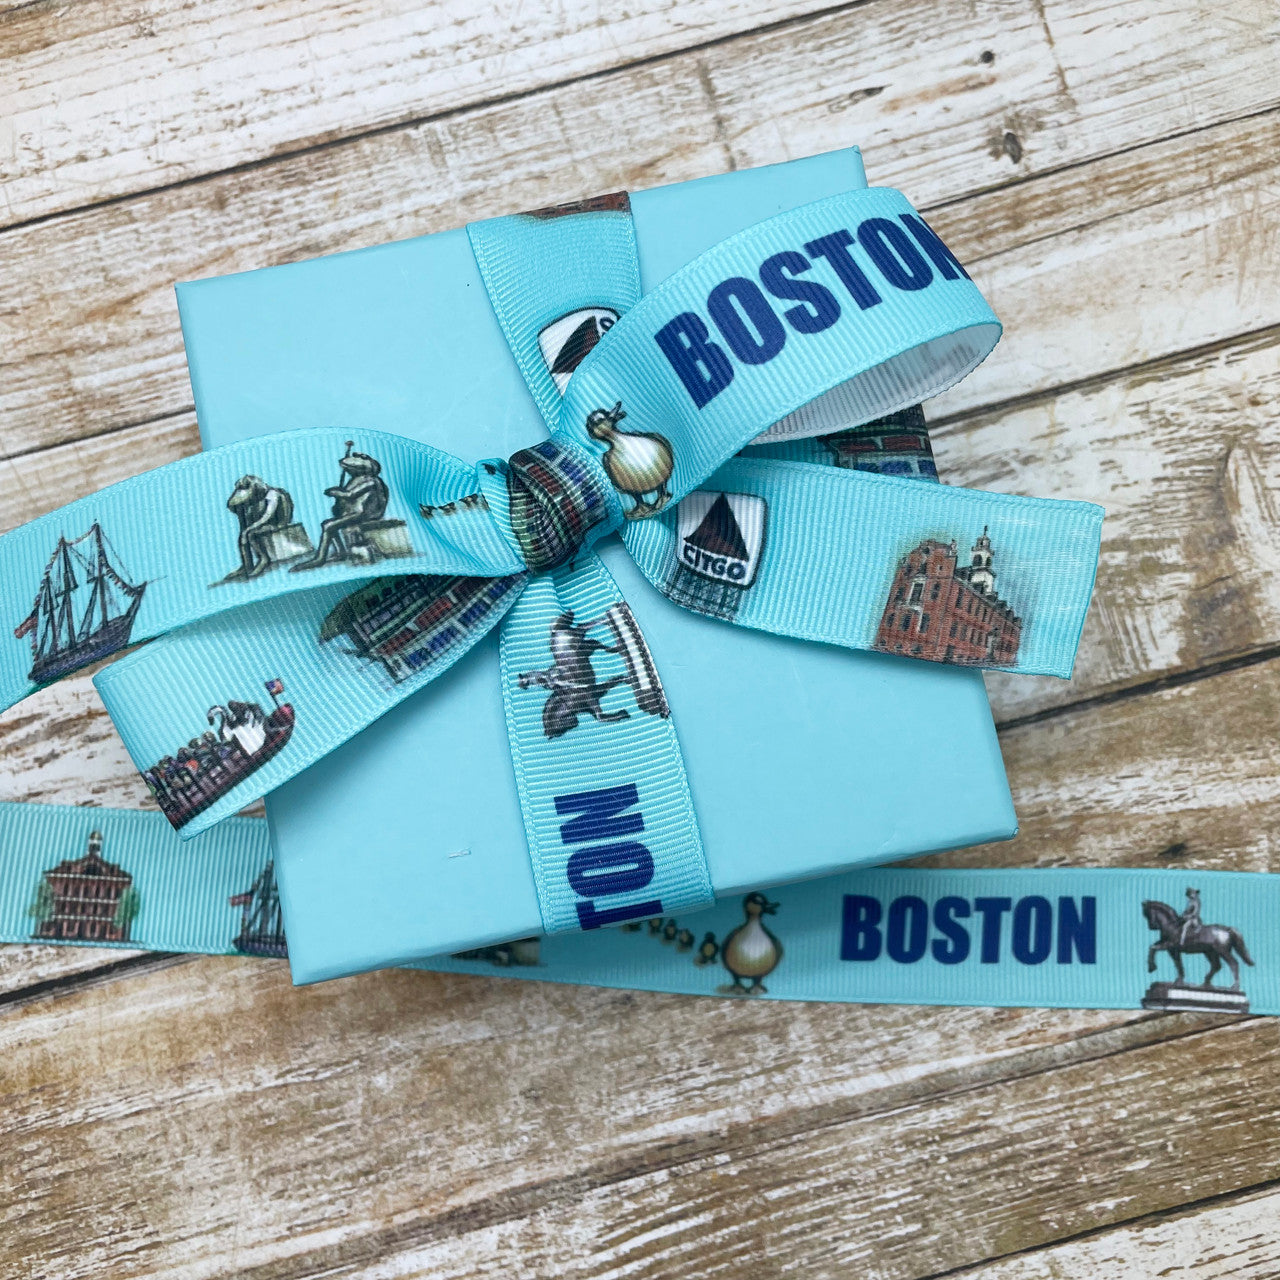 This pretty ribbon with a blue background featuring Boston land marks is perfect for a Boston themed gift!